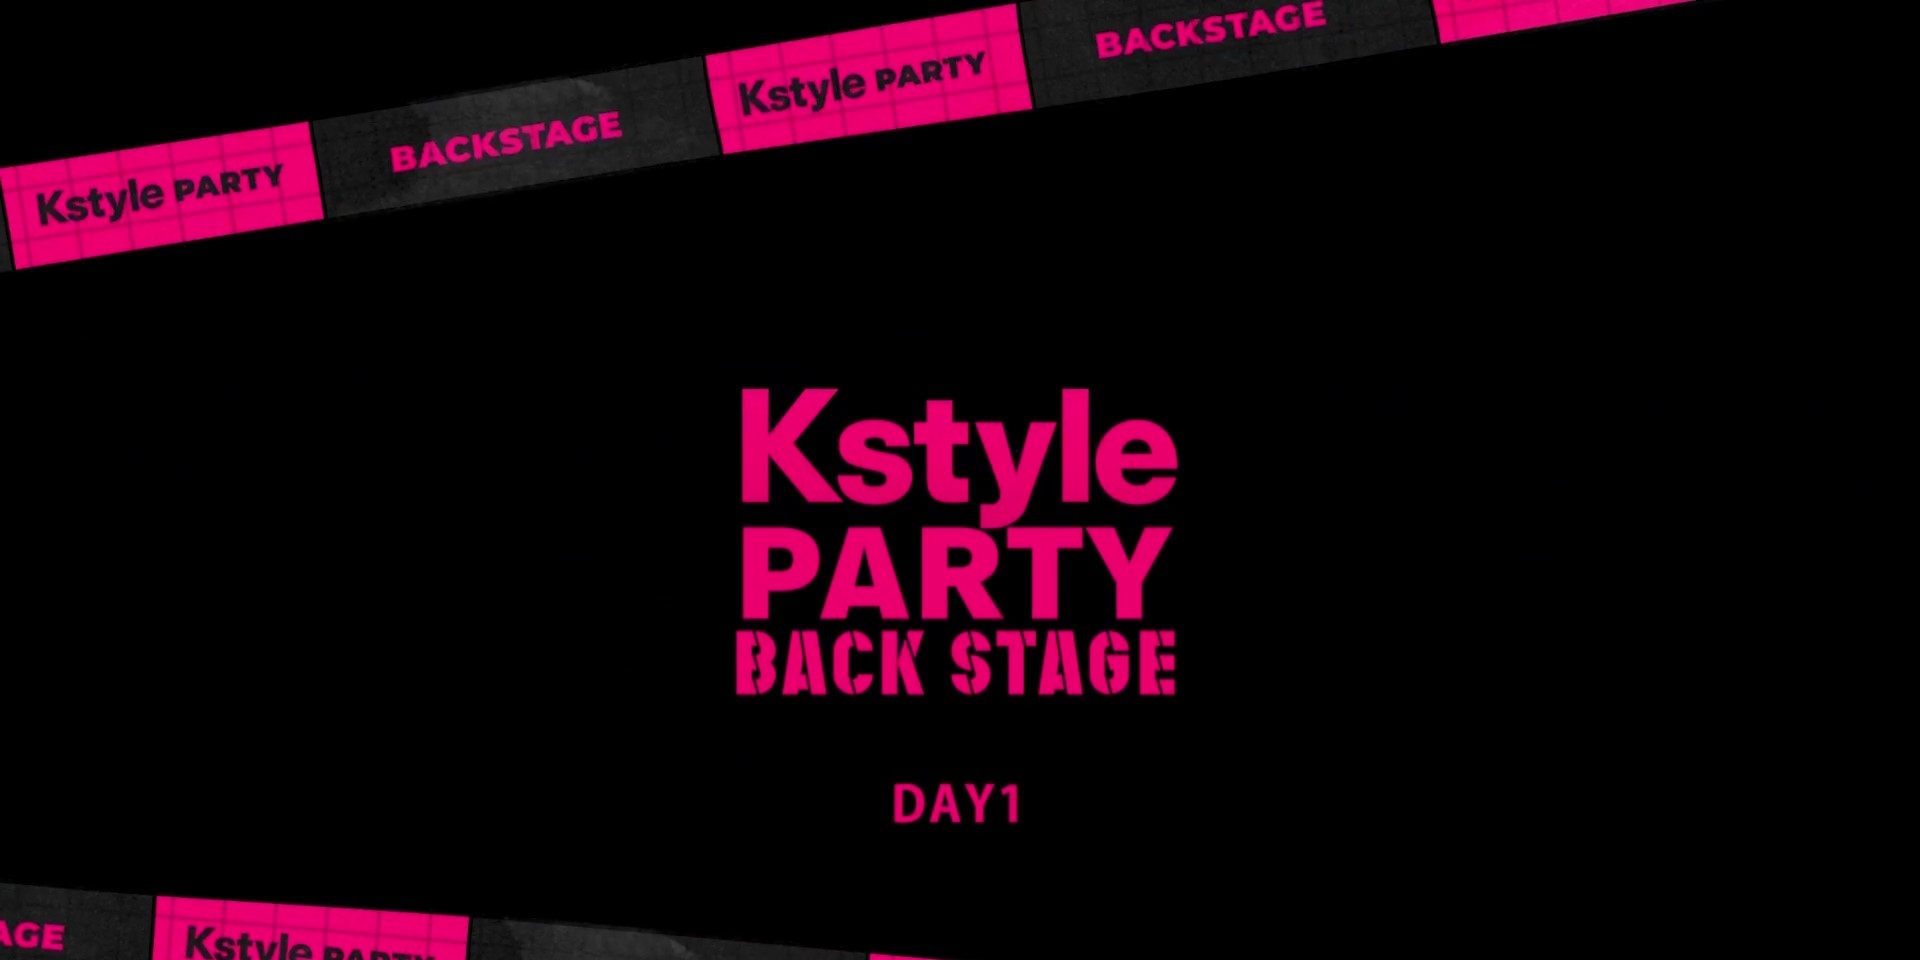 New K-POP music festival "Kstyle PARTY" in Tokyo on Feb 24-25, with various artists performing. Behind-the-scenes making will be revealed on YouTube.